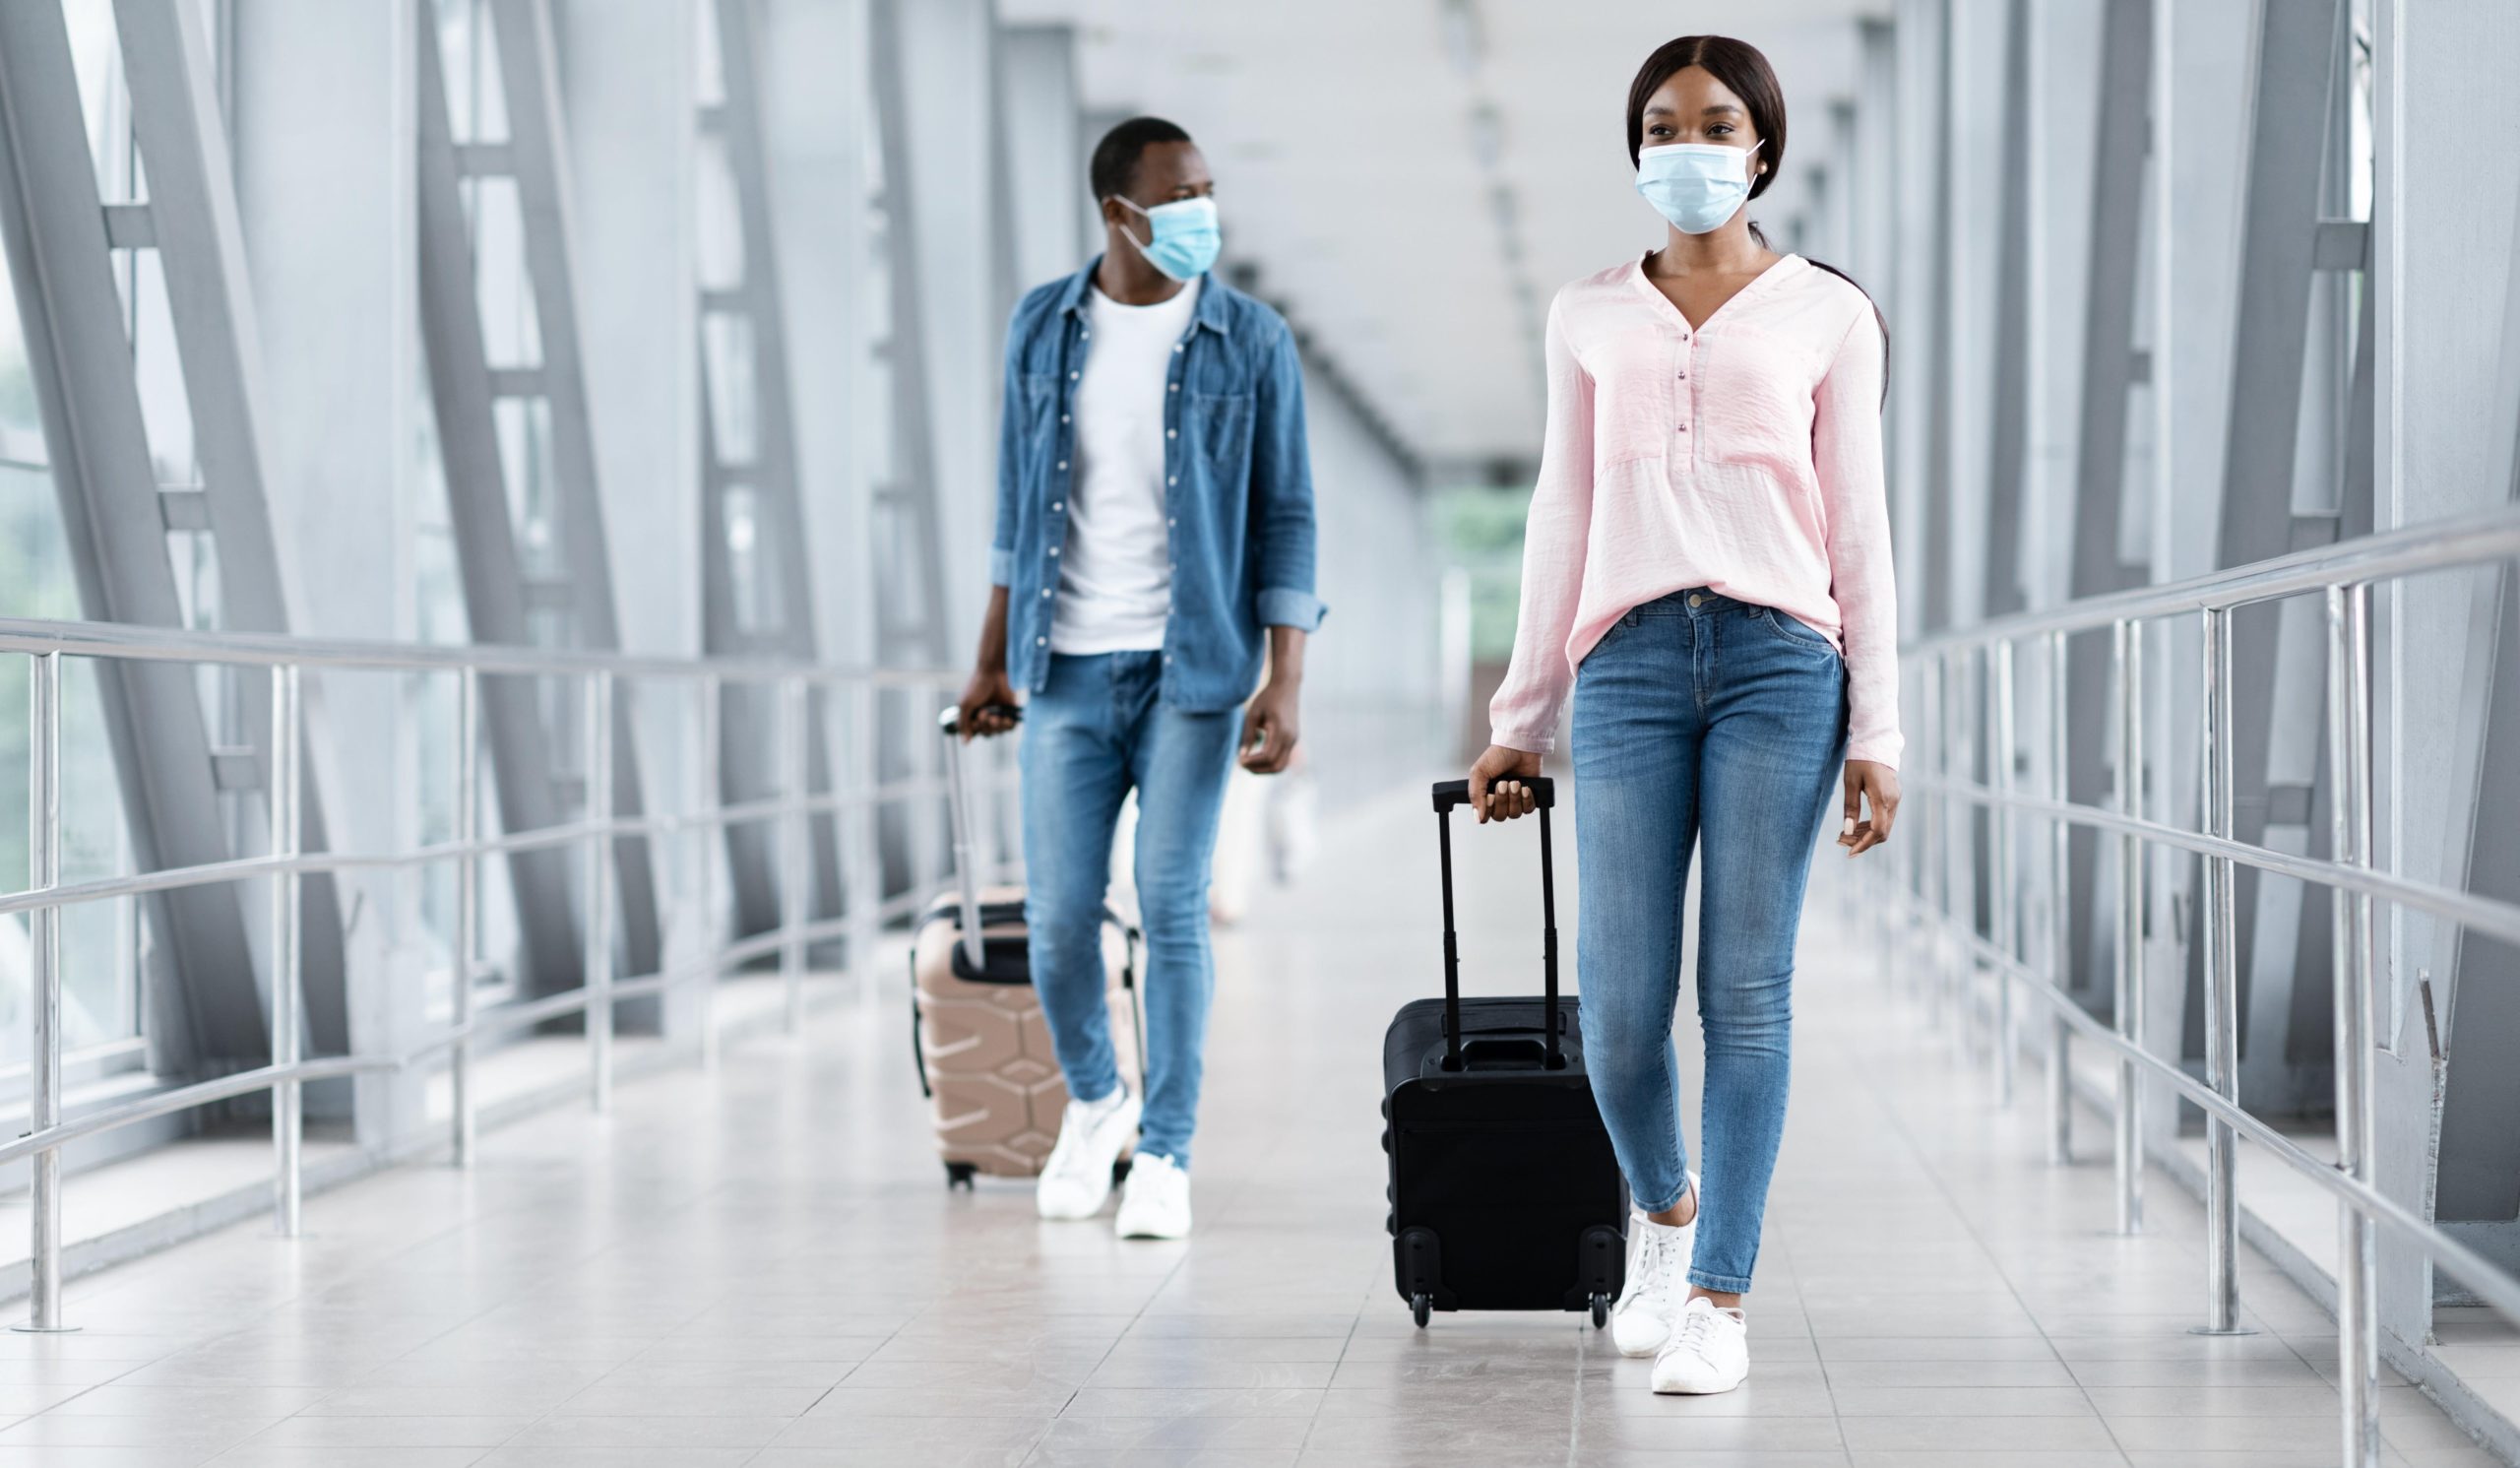 5 Pandemic-Era Travel Scams and How to Avoid Them